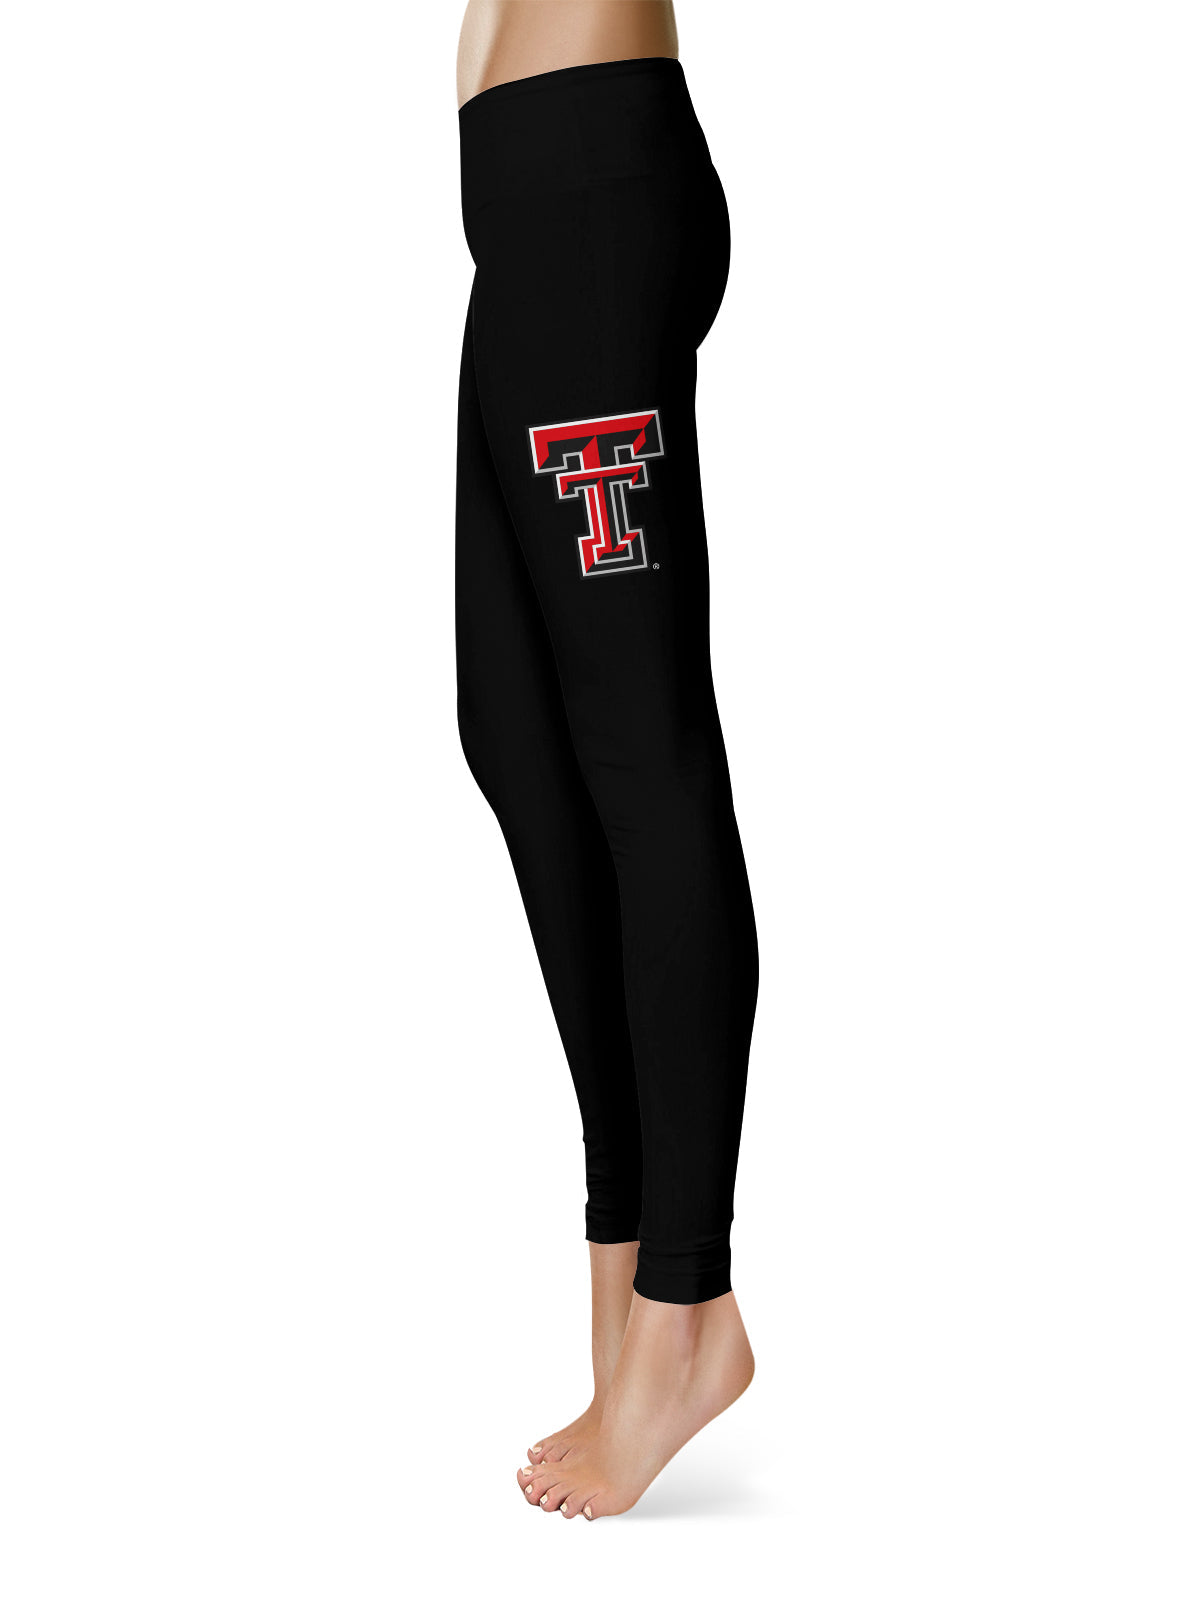 Texas Tech Red Raiders Game Day Large Logo on Thigh Black Yoga Leggings for  Women 2.5 Waist Tights